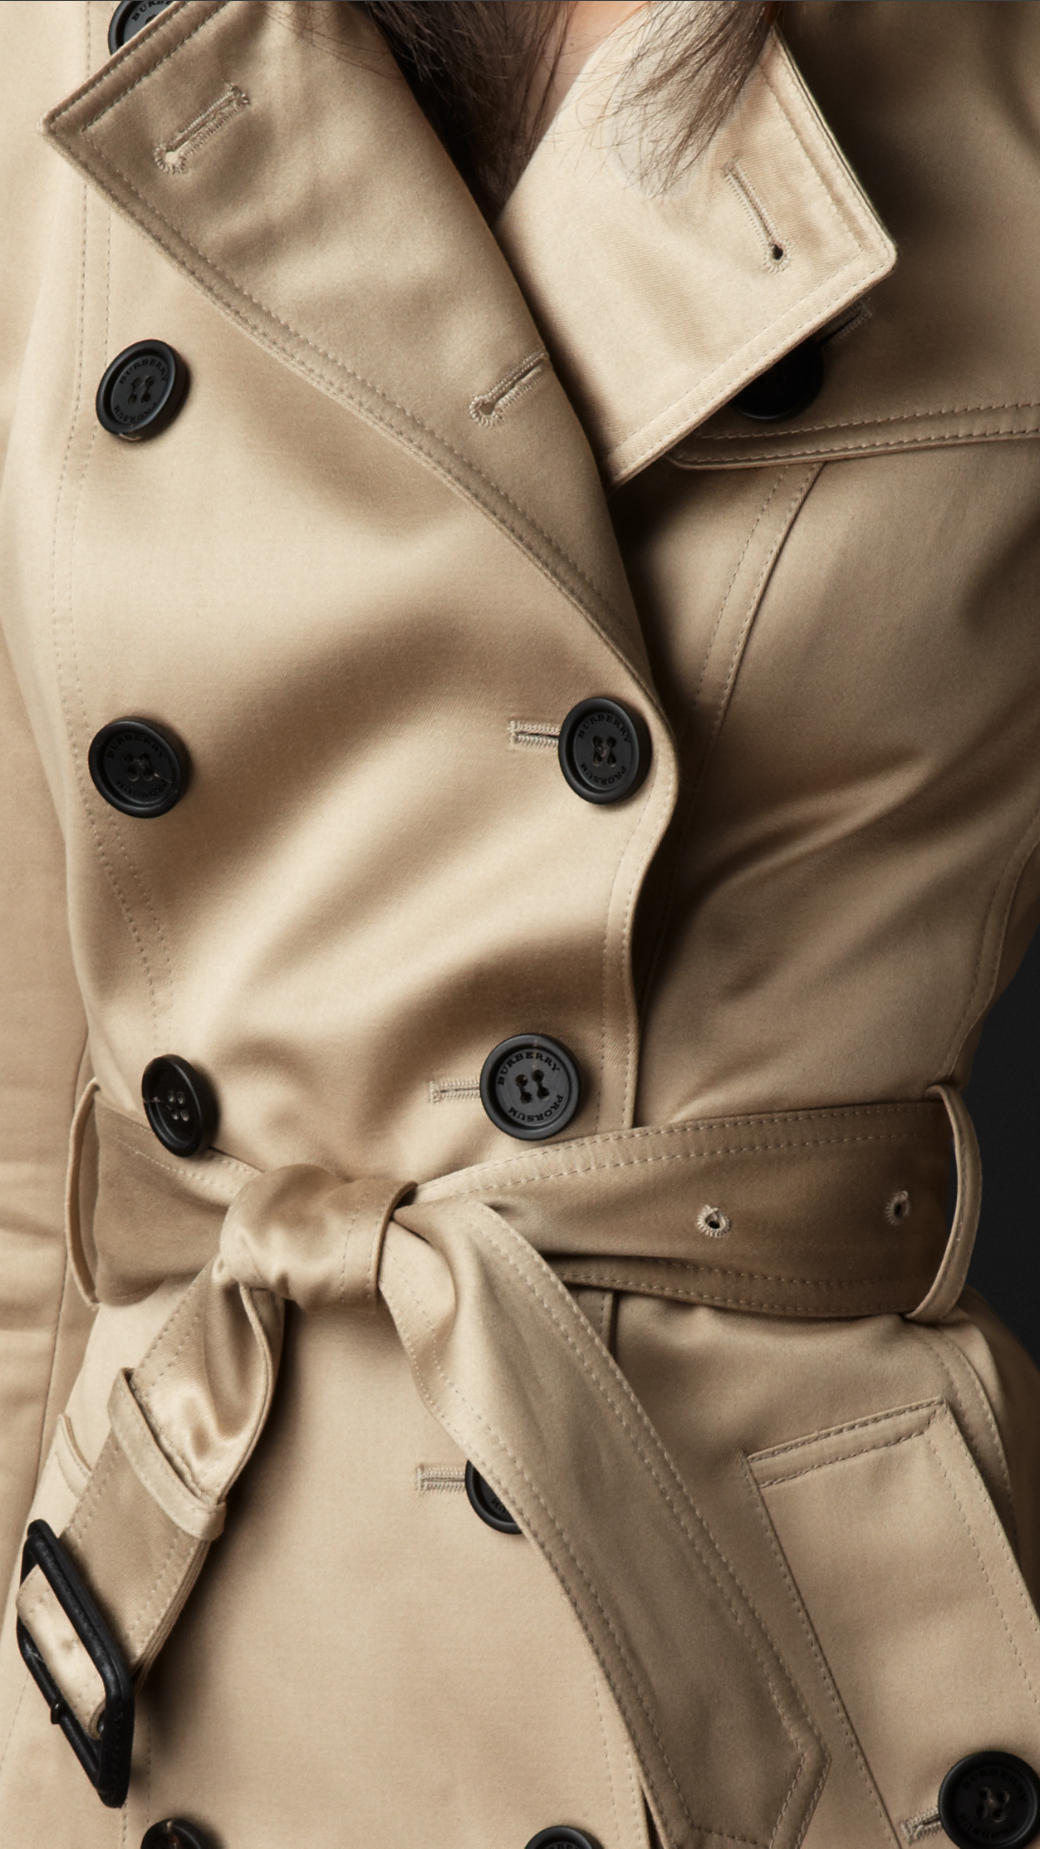 Burberry Prorsum Long Cotton Sateen Trench Coat in Natural - Lyst